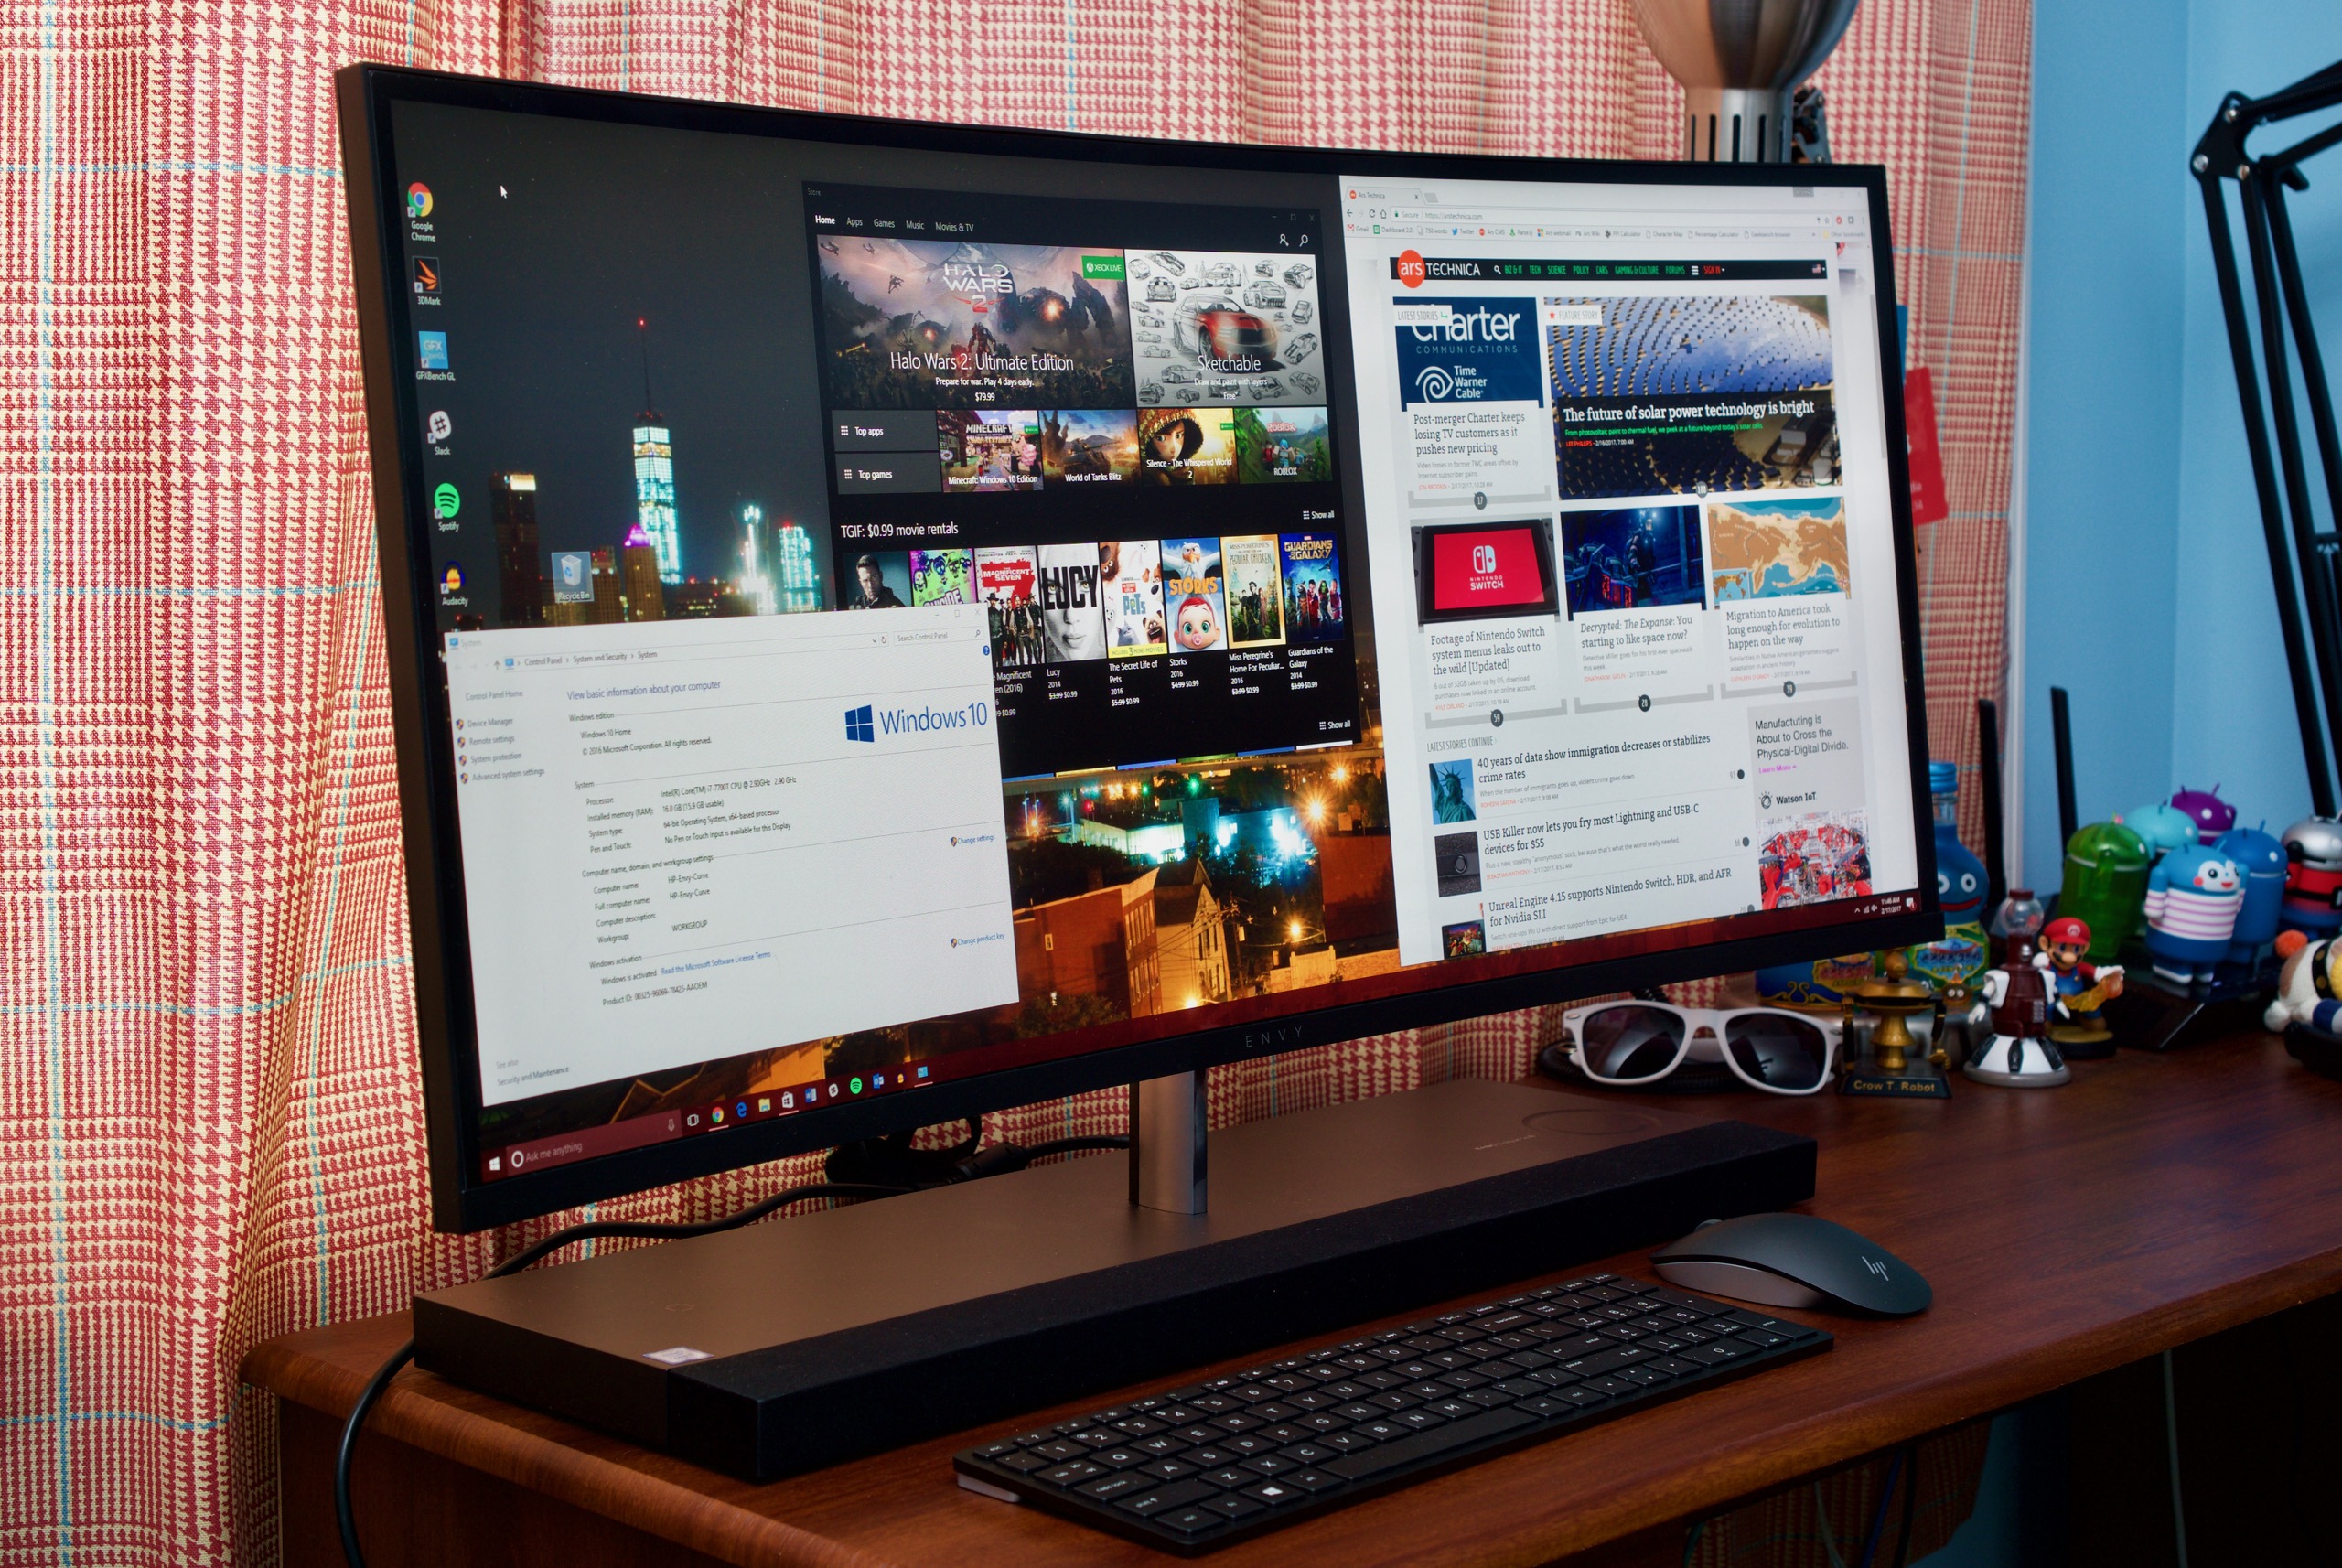 Huge, curved, fast, and loud: HP’s 34-inch Envy all-in-one reviewed